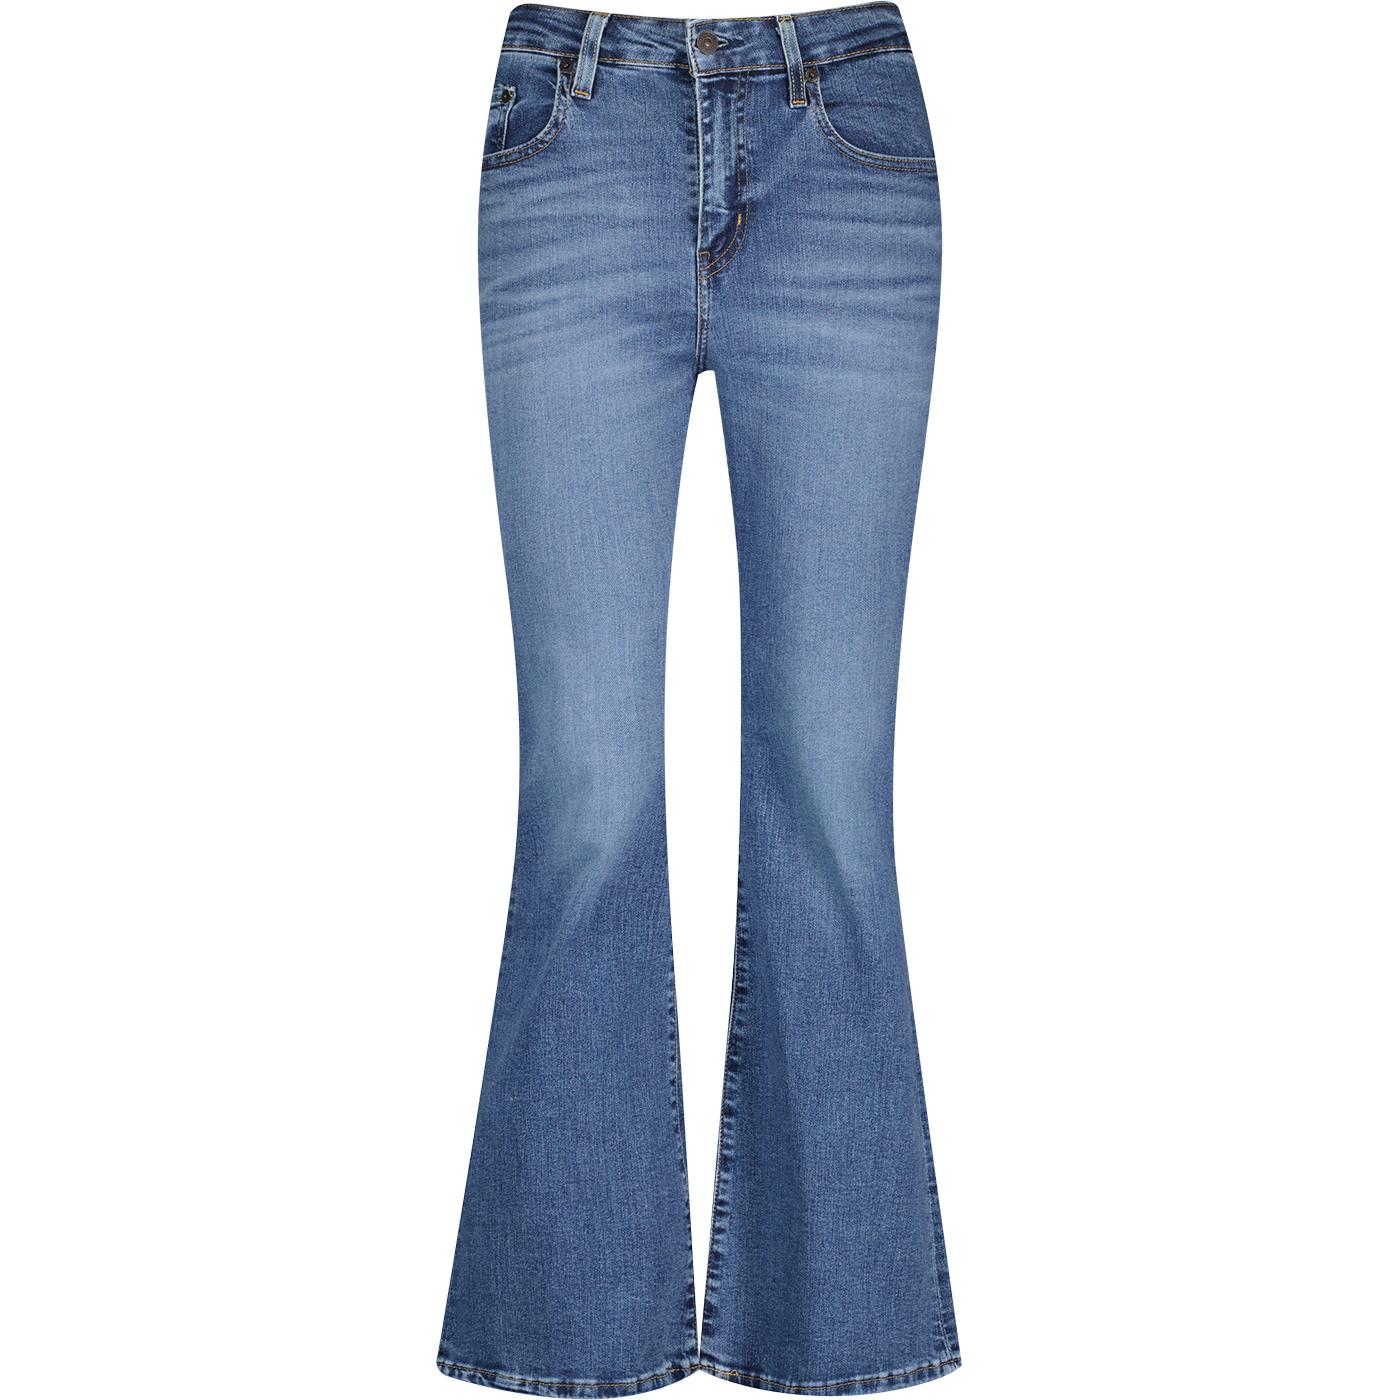 Levi® 726 70s Style High Rise Flares Blue Wave Mid